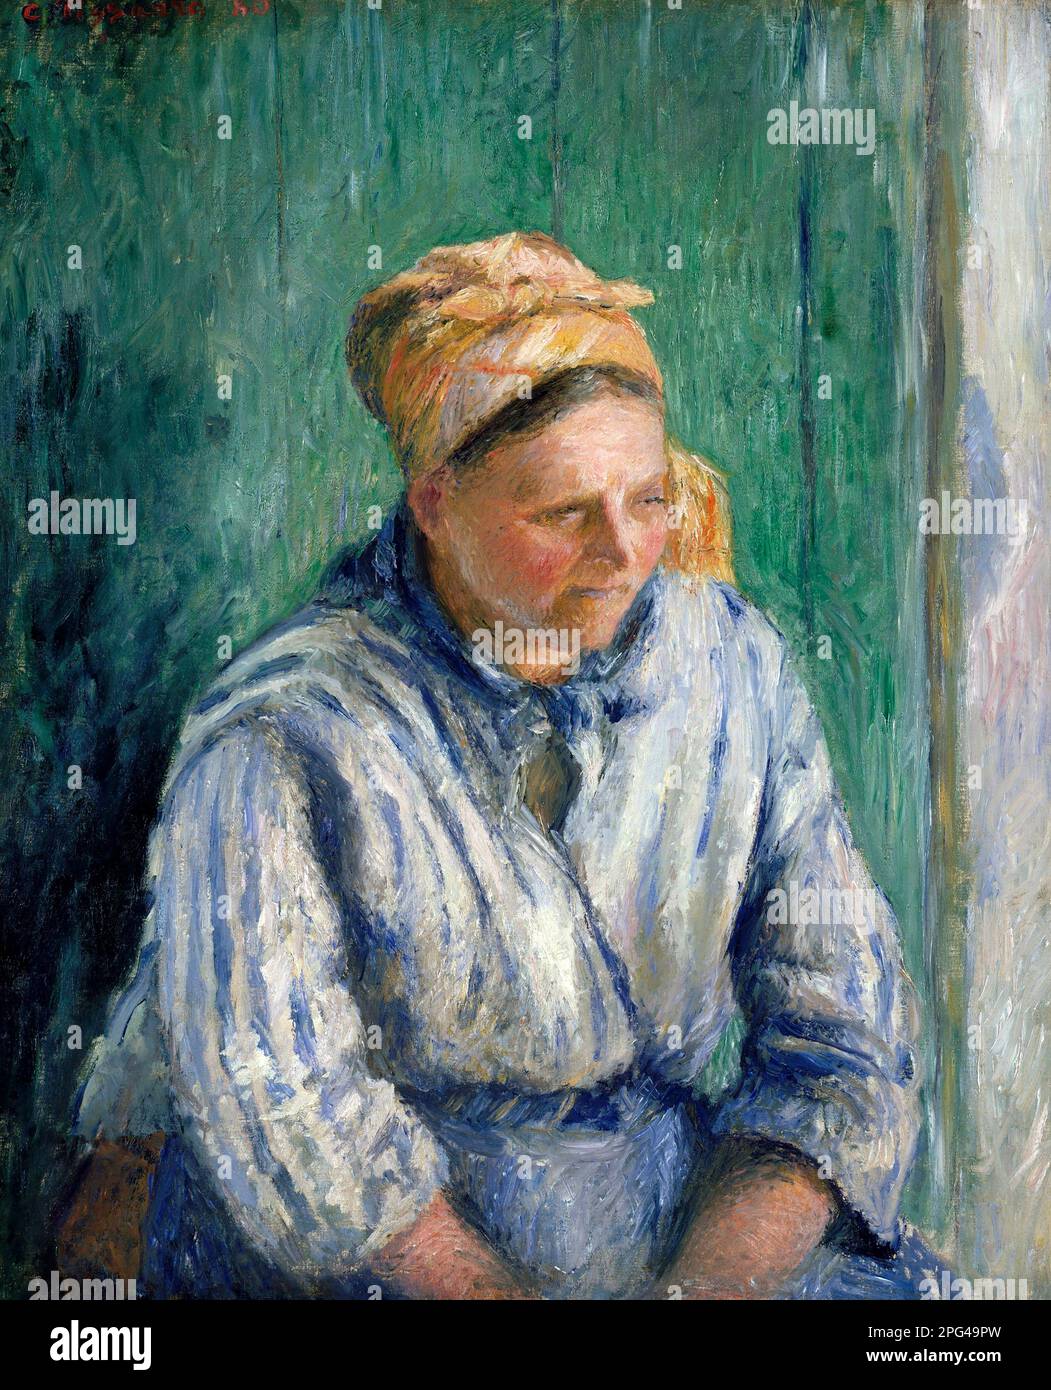 Washerwoman, Study by Camille Pissarro (1830-1903), oil on canvas, 1880 Stock Photo